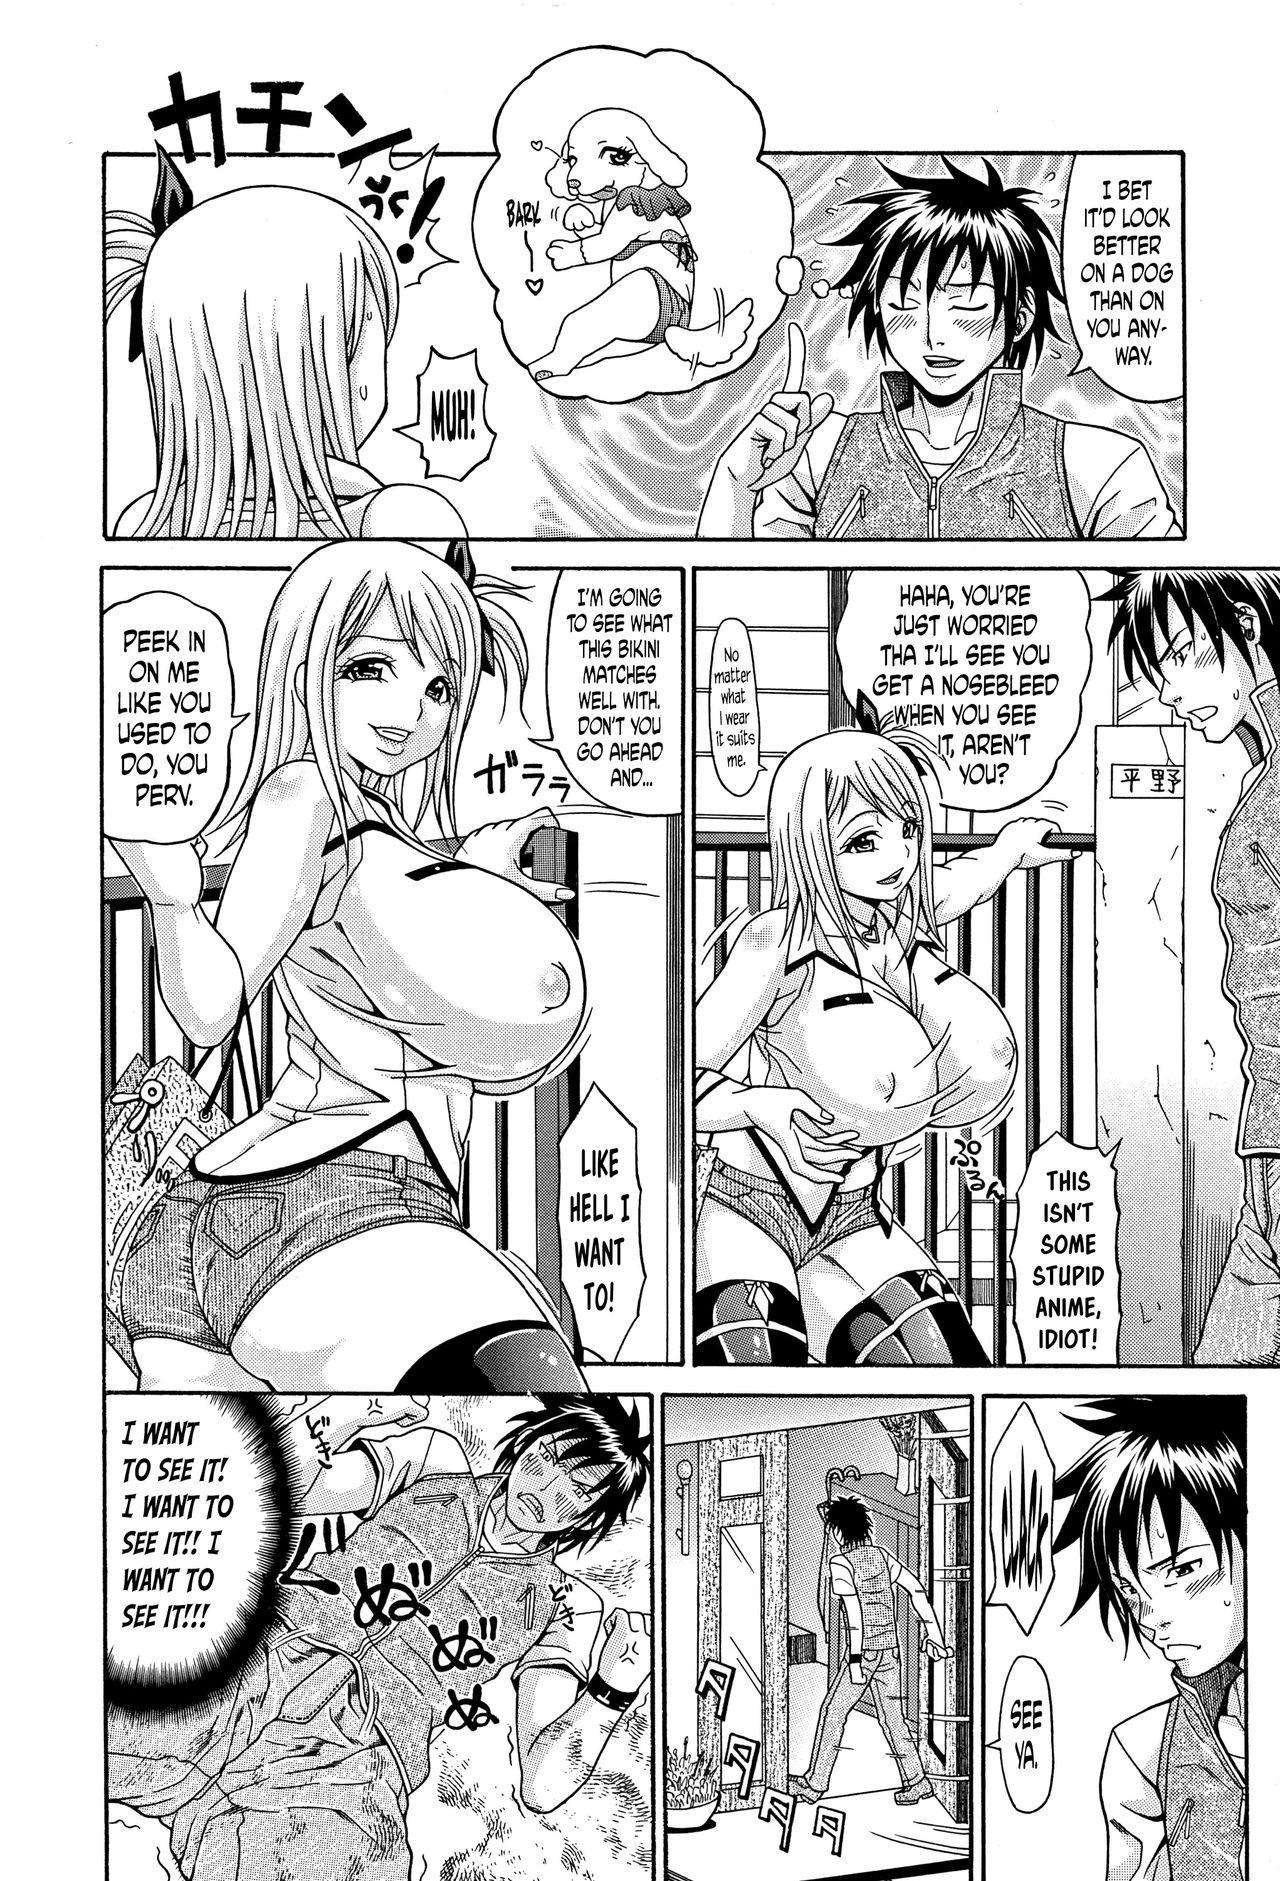 [Andou Hiroyuki] Mamire Chichi - Sticky Tits Feel Hot All Over. Ch.1-9 [English] [doujin-moe.us] 38